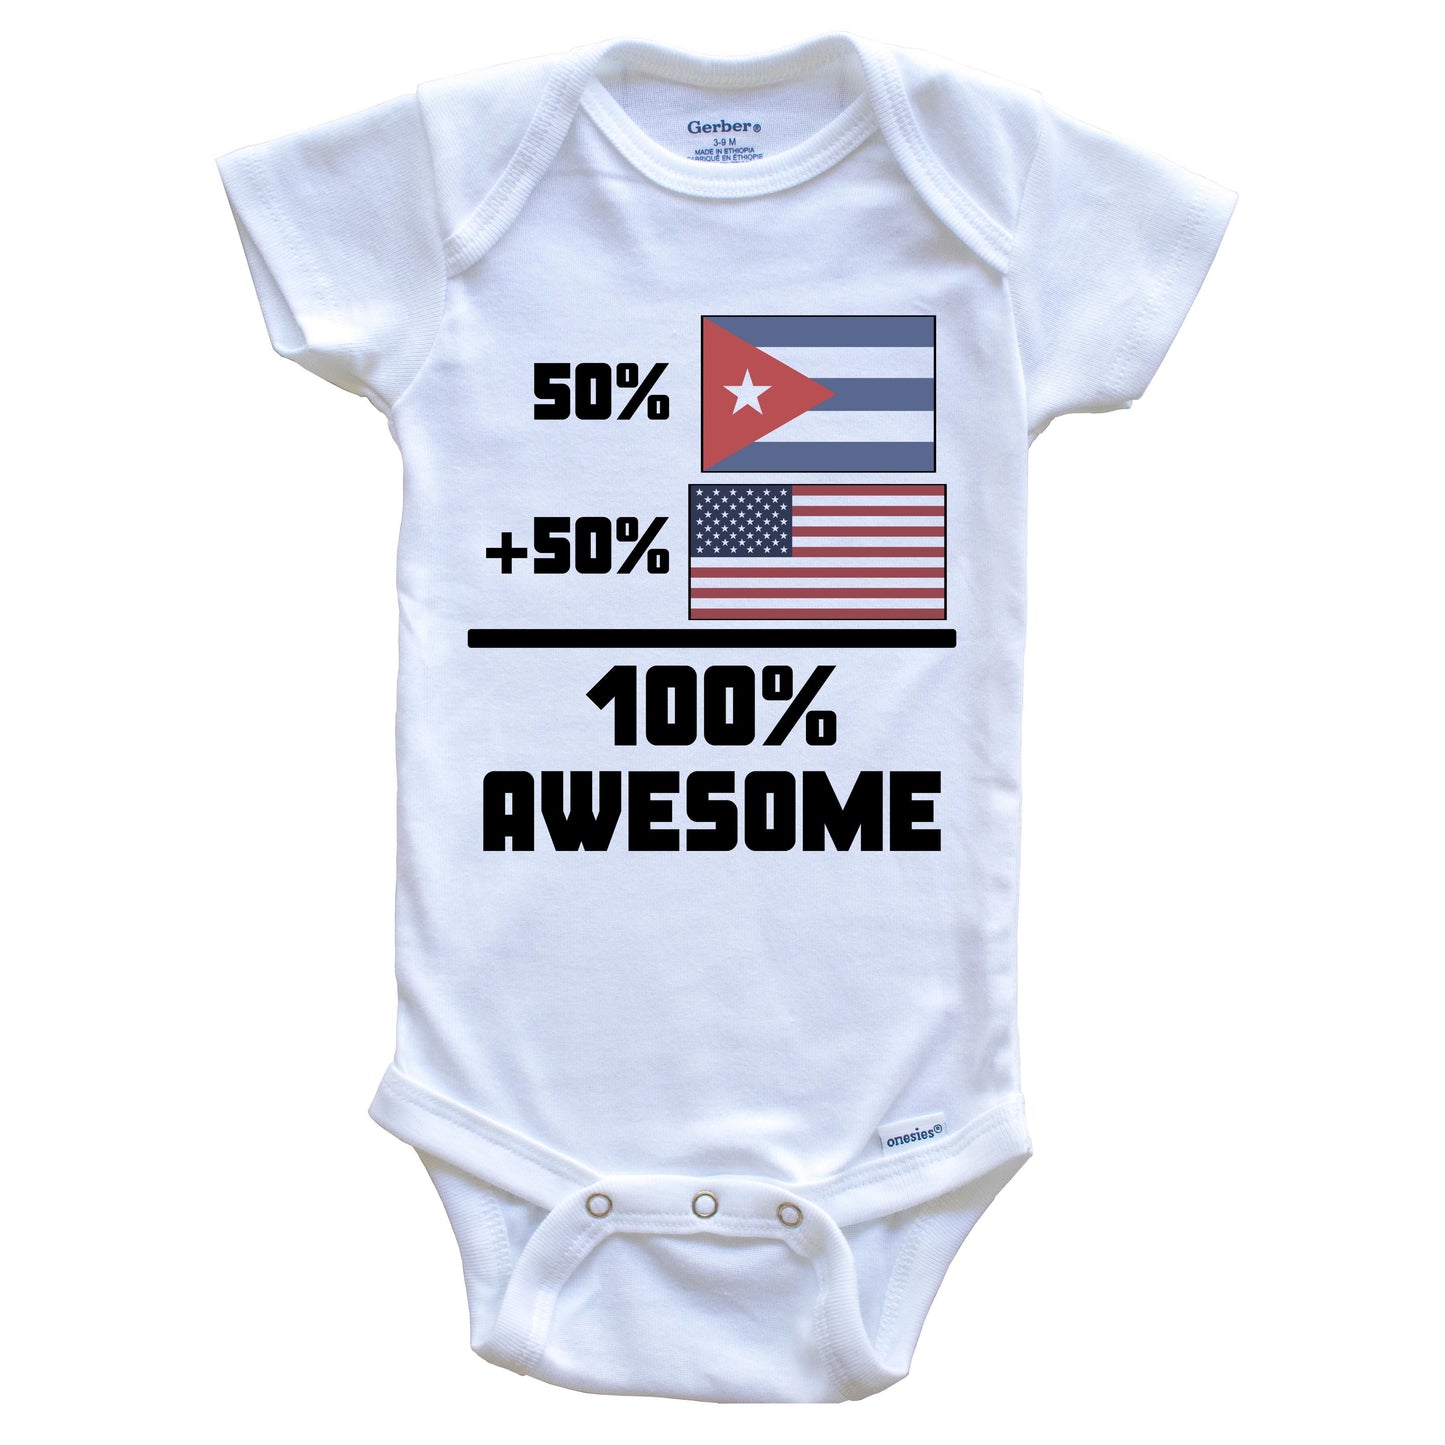 50% Cuban 50% American 100% Awesome Funny Flag Baby Onesie